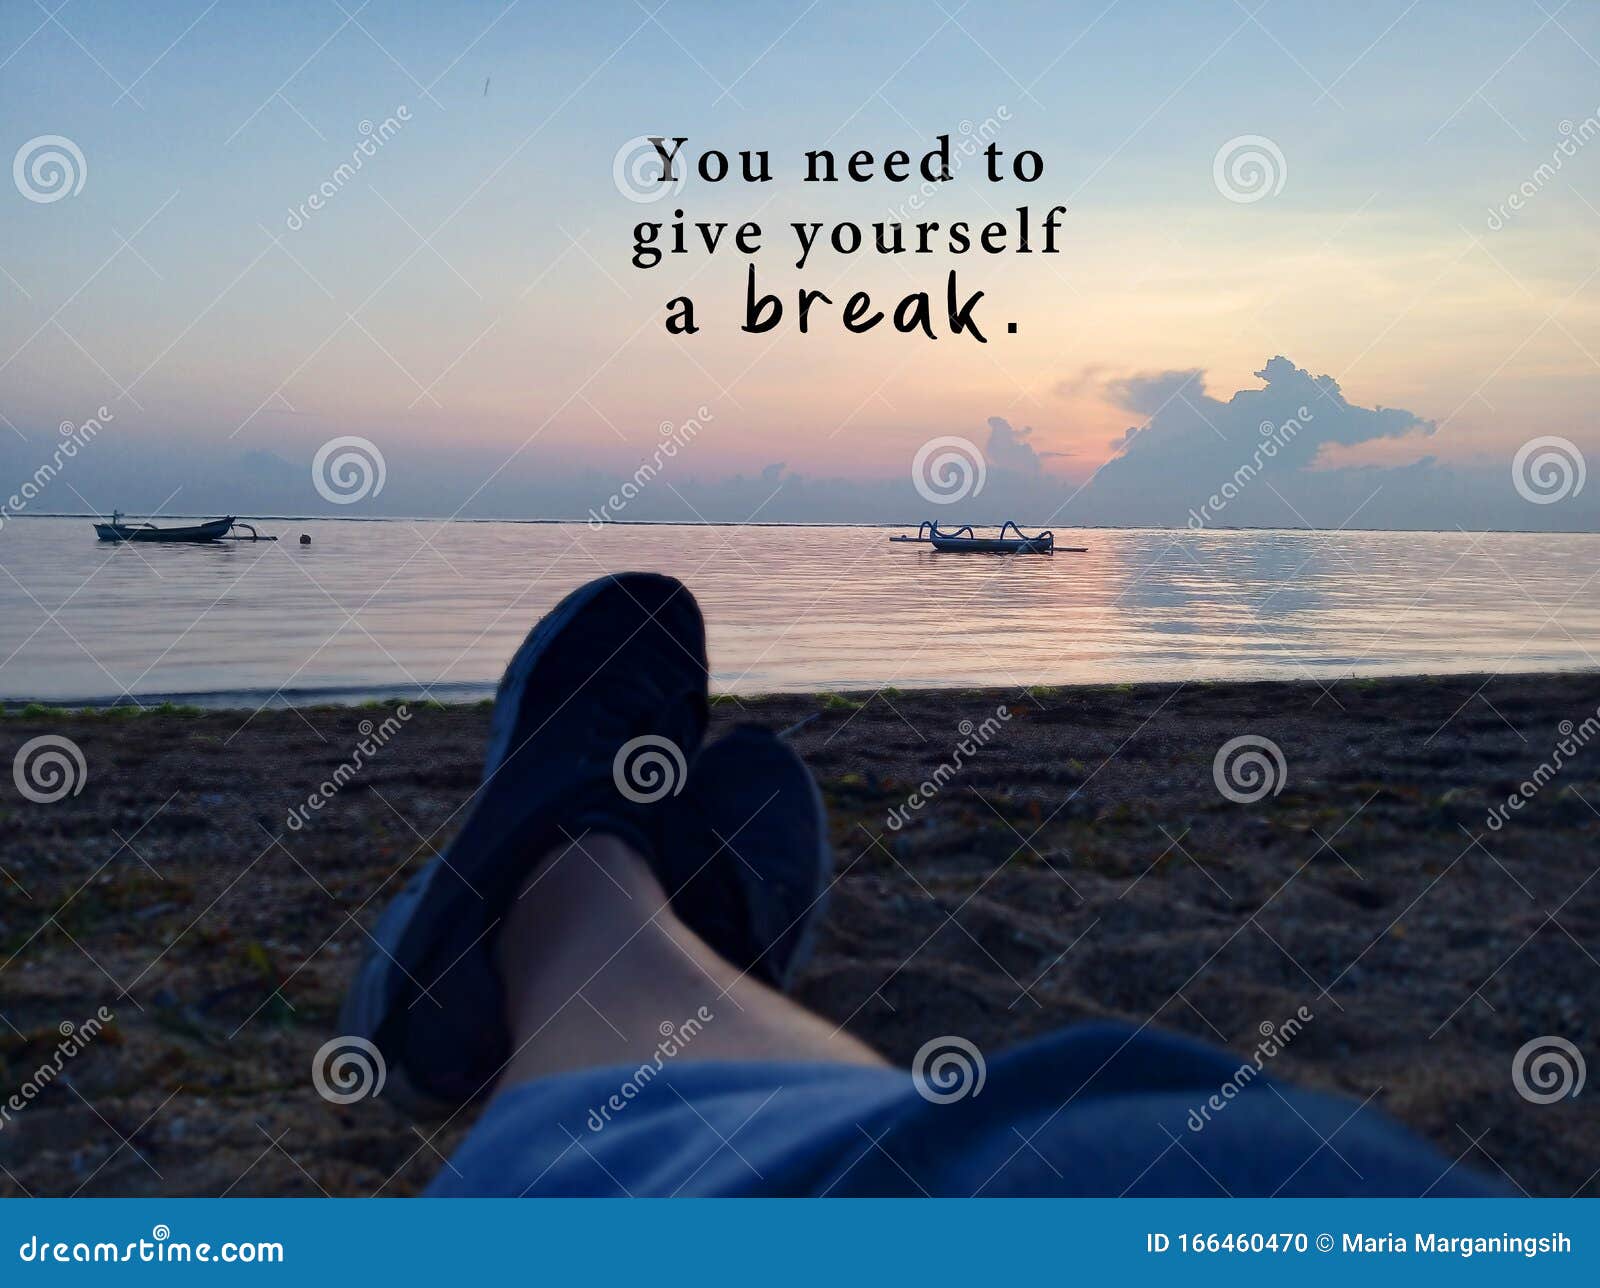 Inspirational Motivational Quote - You Need To Give Yourself A Break. With Blurry Image Of Young Woman Legs Sitting Alone On Sands Stock Photo - Image Of Alone, Love: 166460470